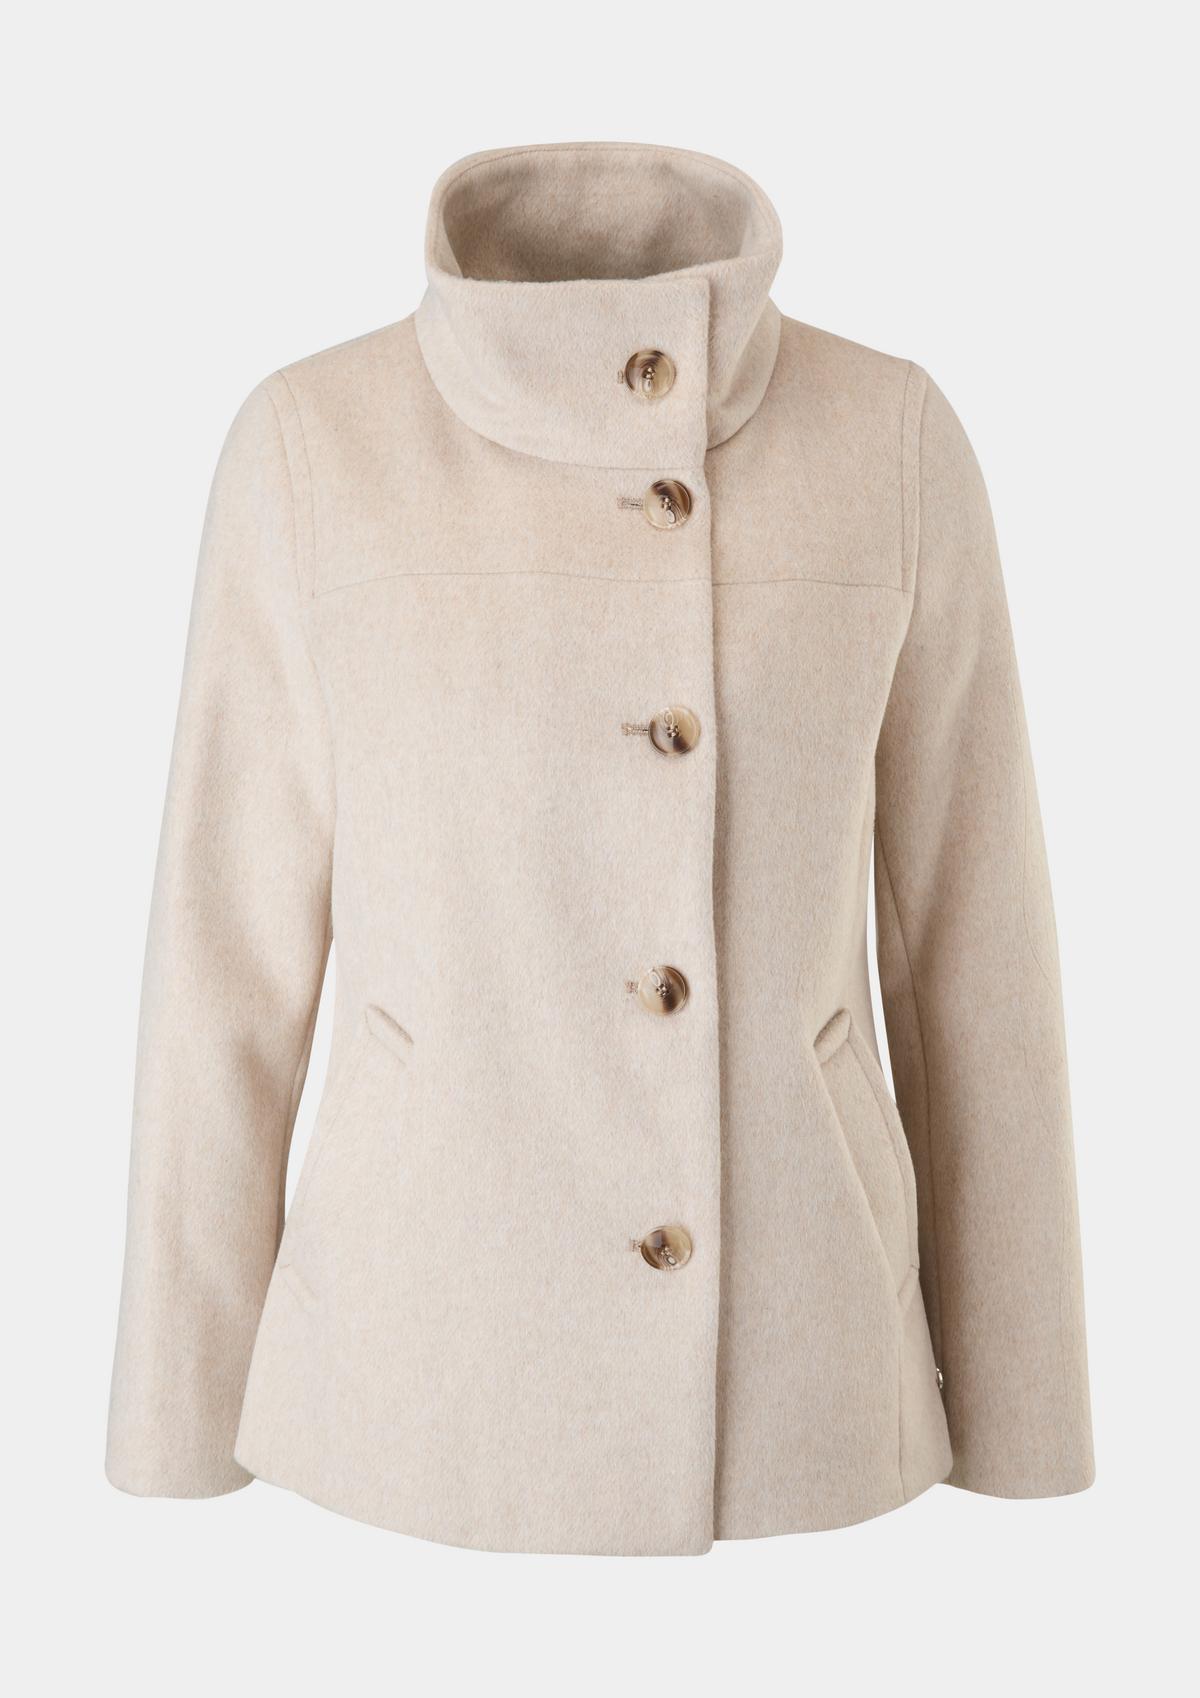 Wool coat with a high collar - navy